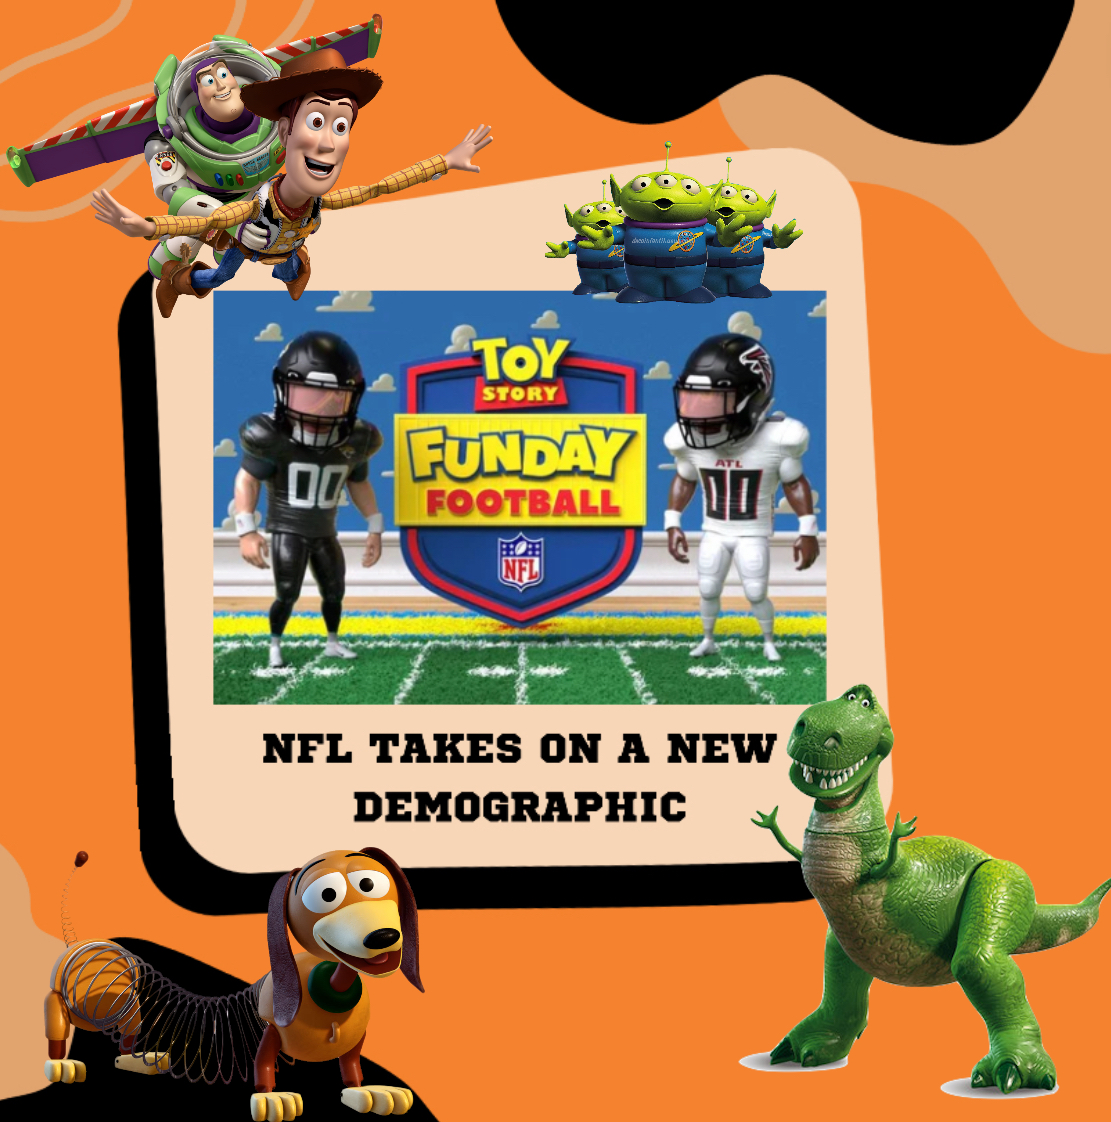 The NFL Takes on a New Demographic